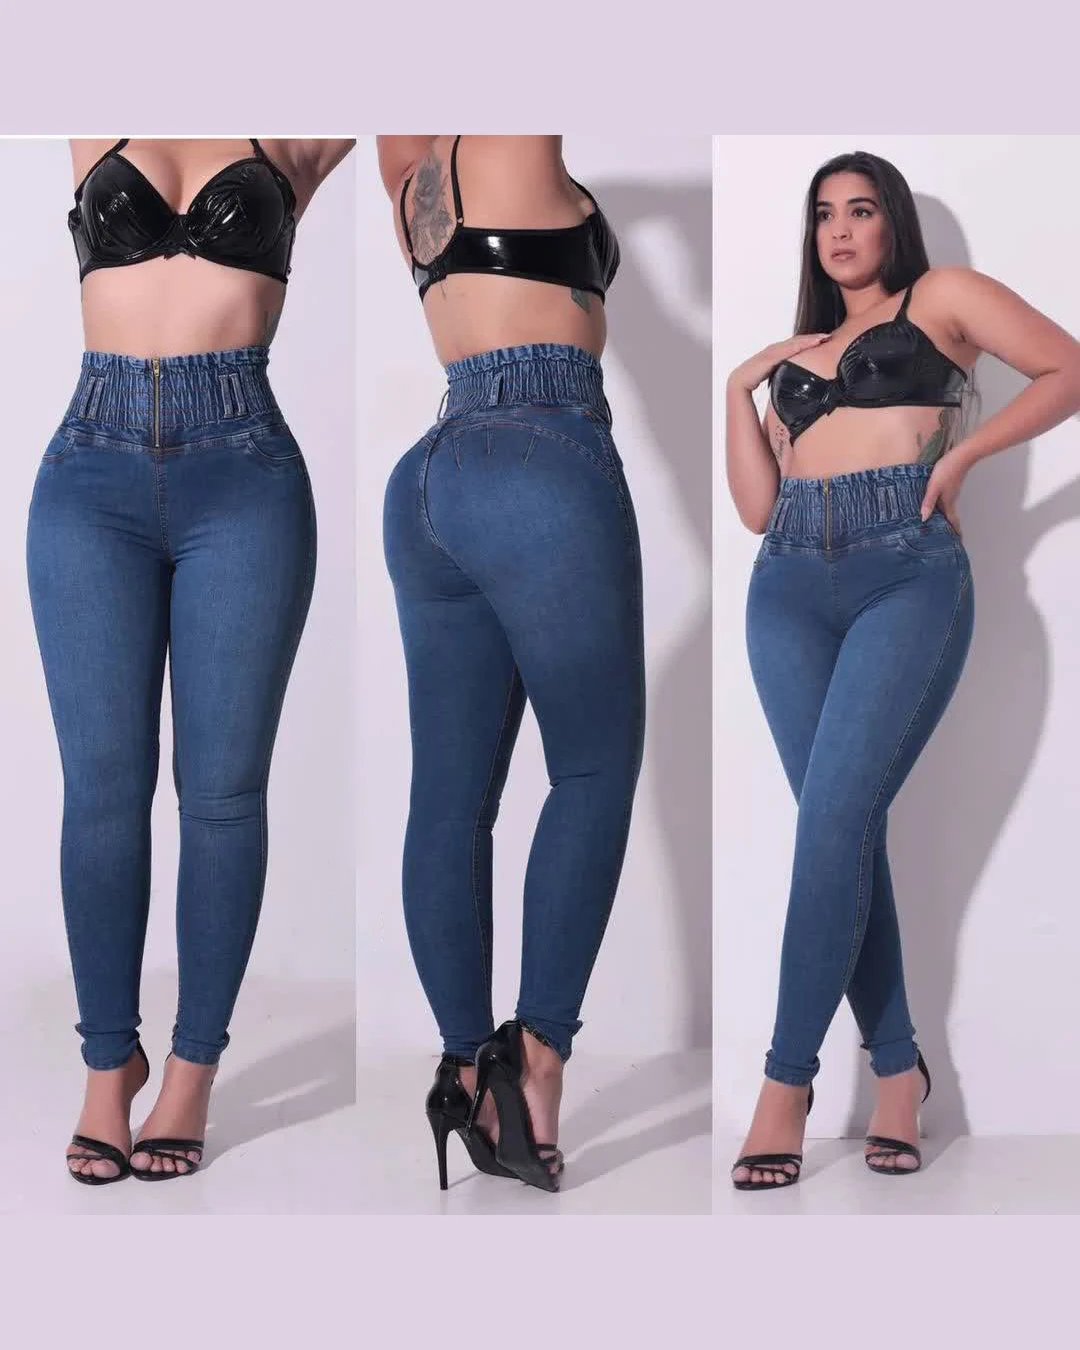 

HIigh Waisted Front Zipper Stretchy Jeans New Curved Fit Pants Distress Jean Women'S High Waist Personalized Jeans Trousers